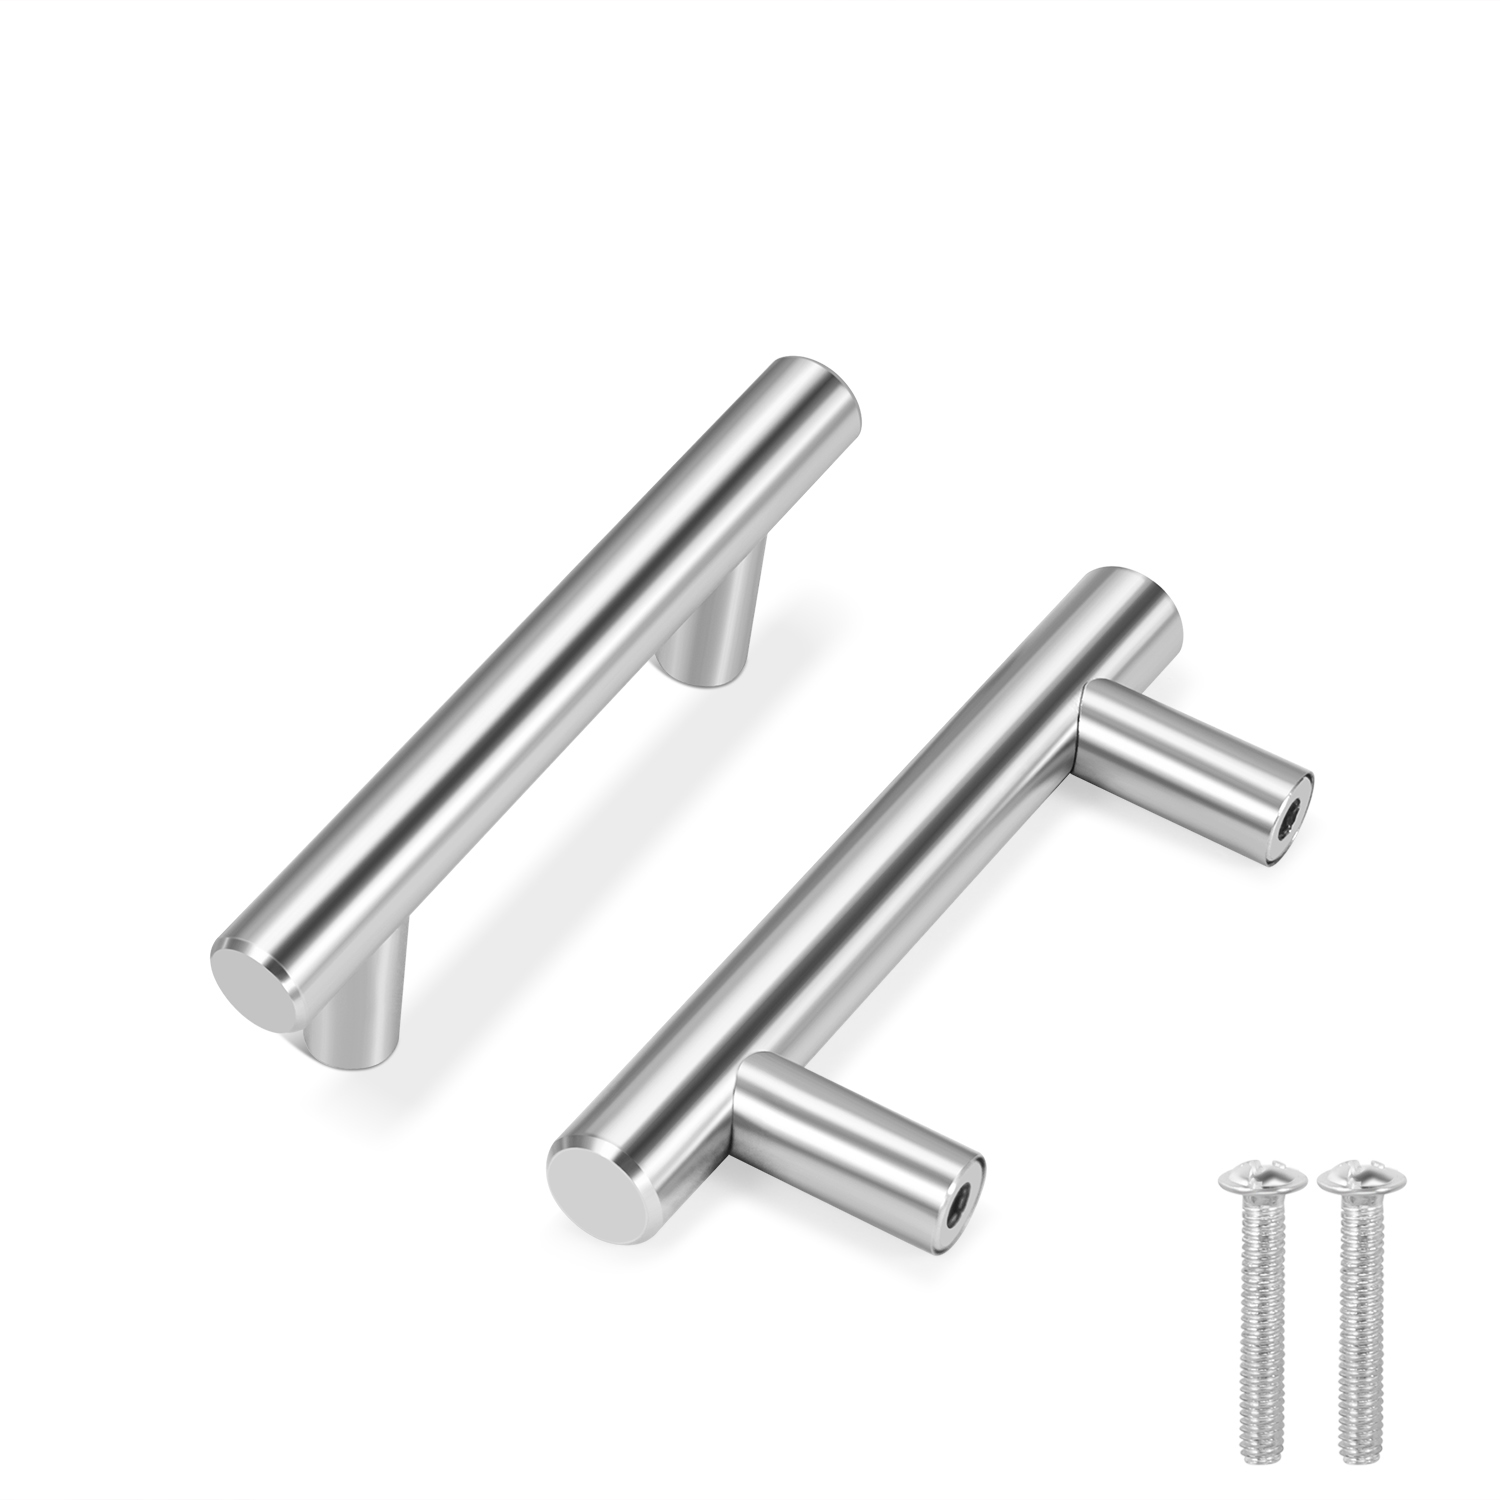 1 Pack Kitchen Cabinet Handles Silver Drawer Pulls 4 inch, 2.5 inch Hole Center, Solid Stainless Steel T Bar with Satin Brushed Nickel, Hardware for Kitchen Cupboard Door Bathroom Furniture - image 1 of 7